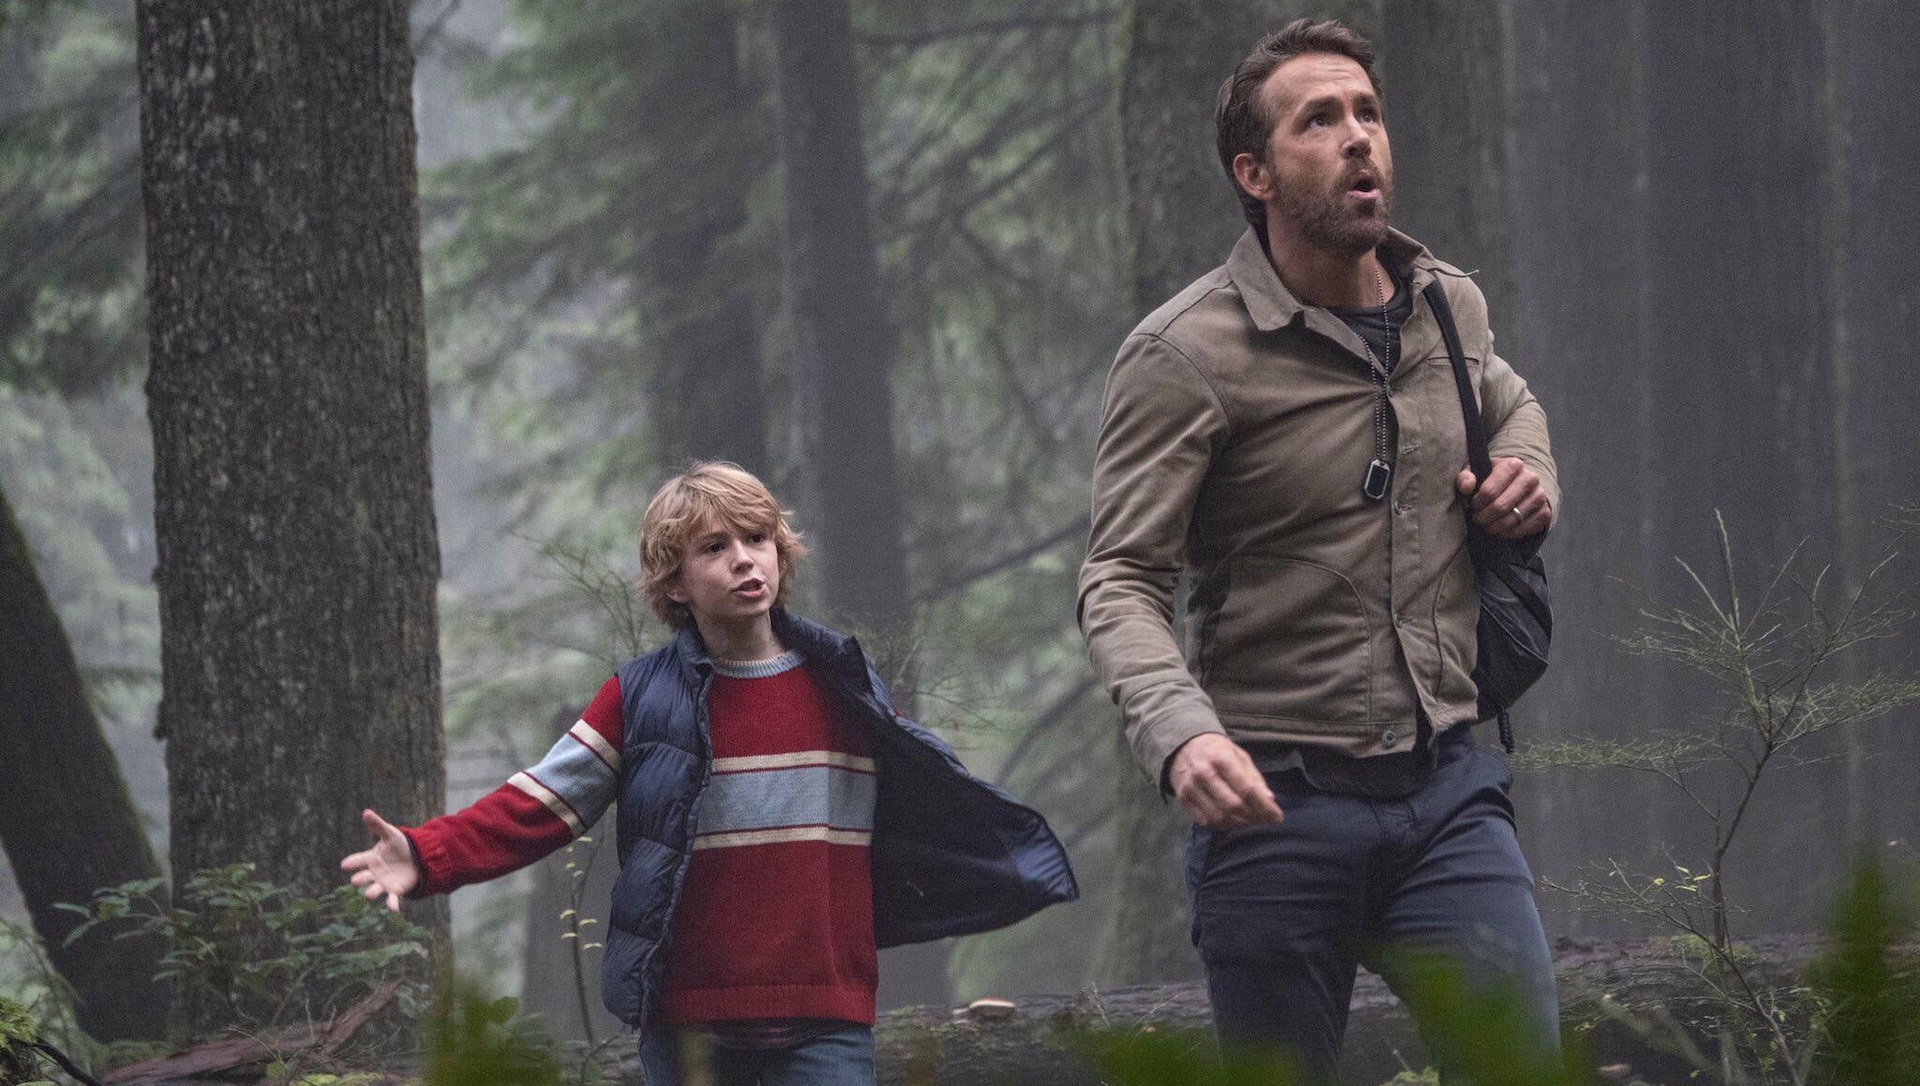 Free Guy duo Ryan Reynolds and Shawn Levy's time travel movie heading to  Netflix in 2022